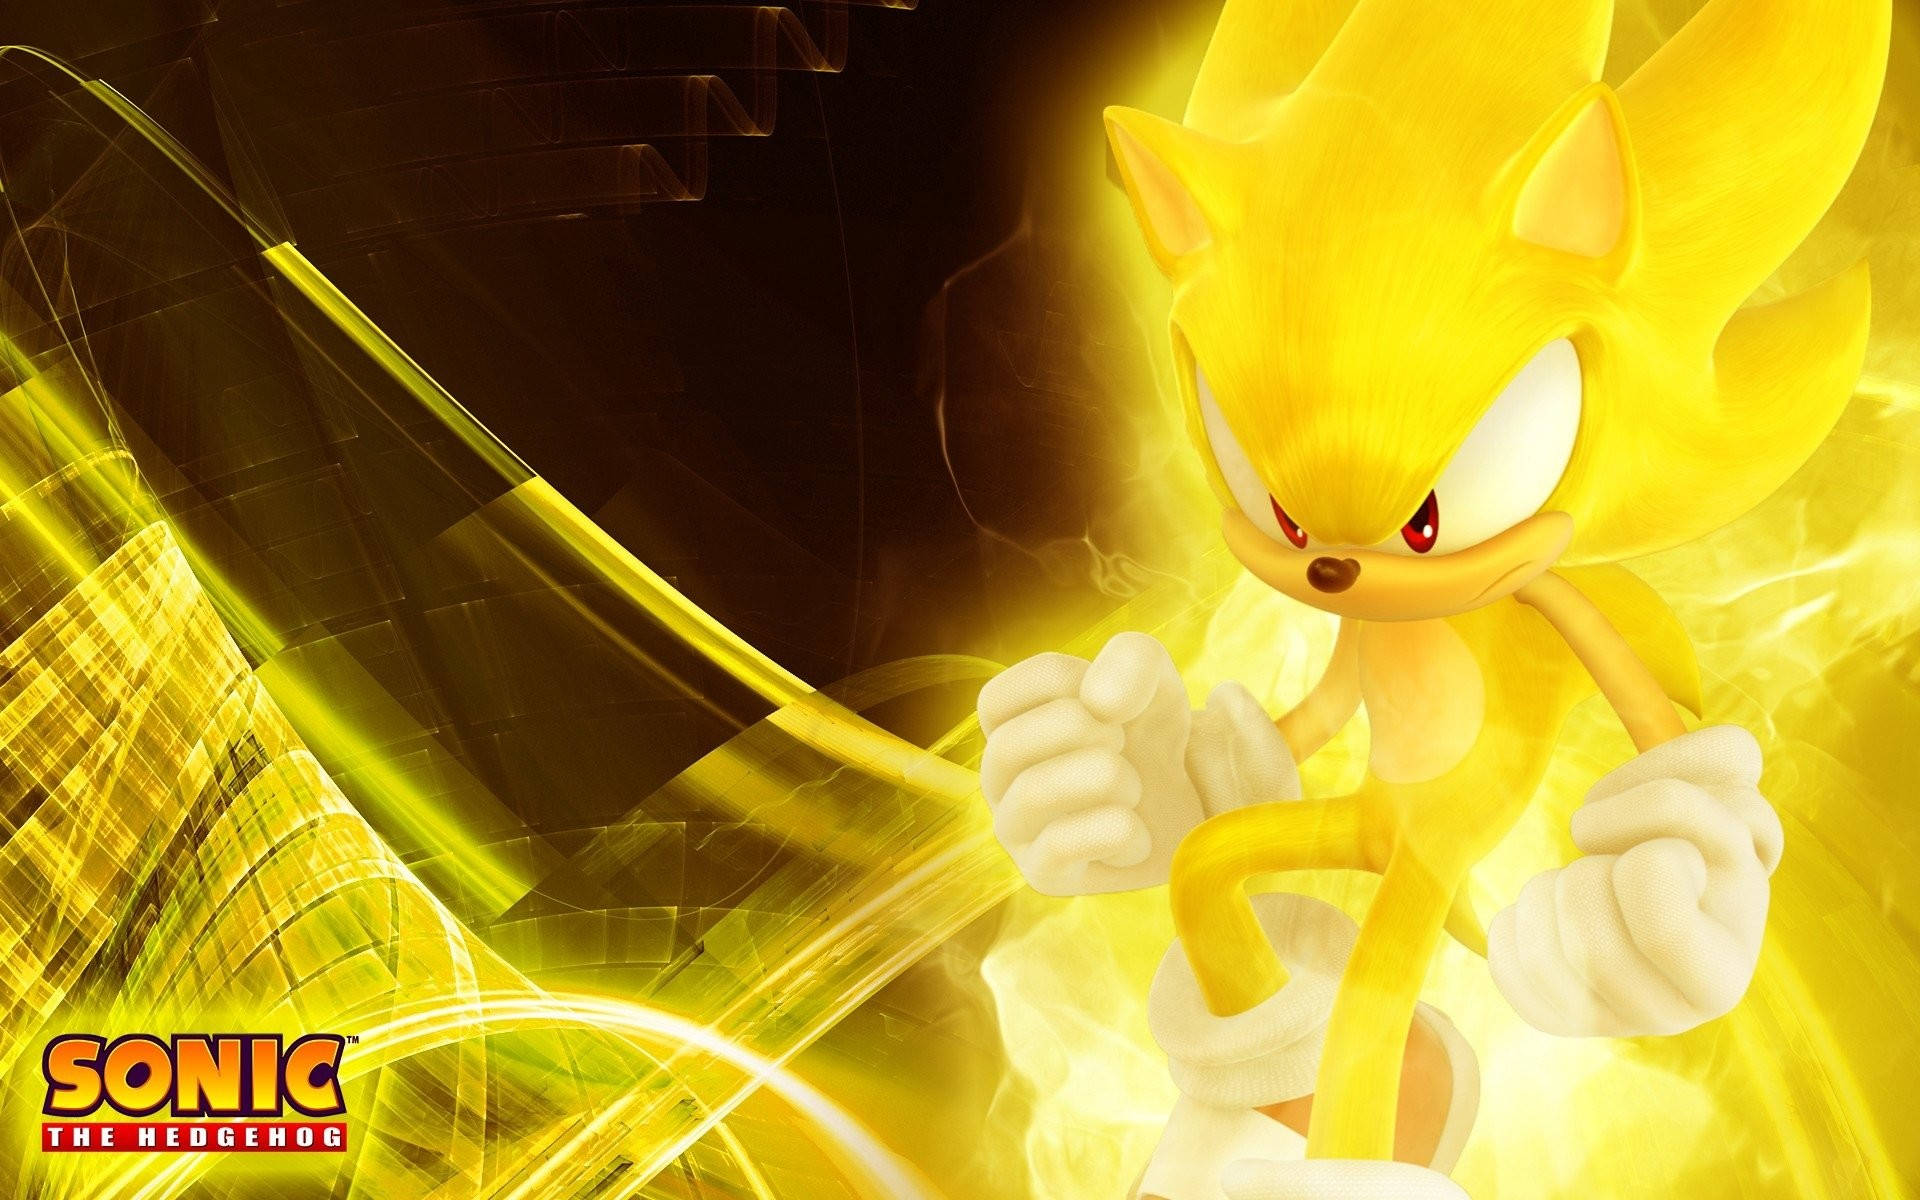 Blast into the new level of cool with our Cool Sonic collection! Wallpaper